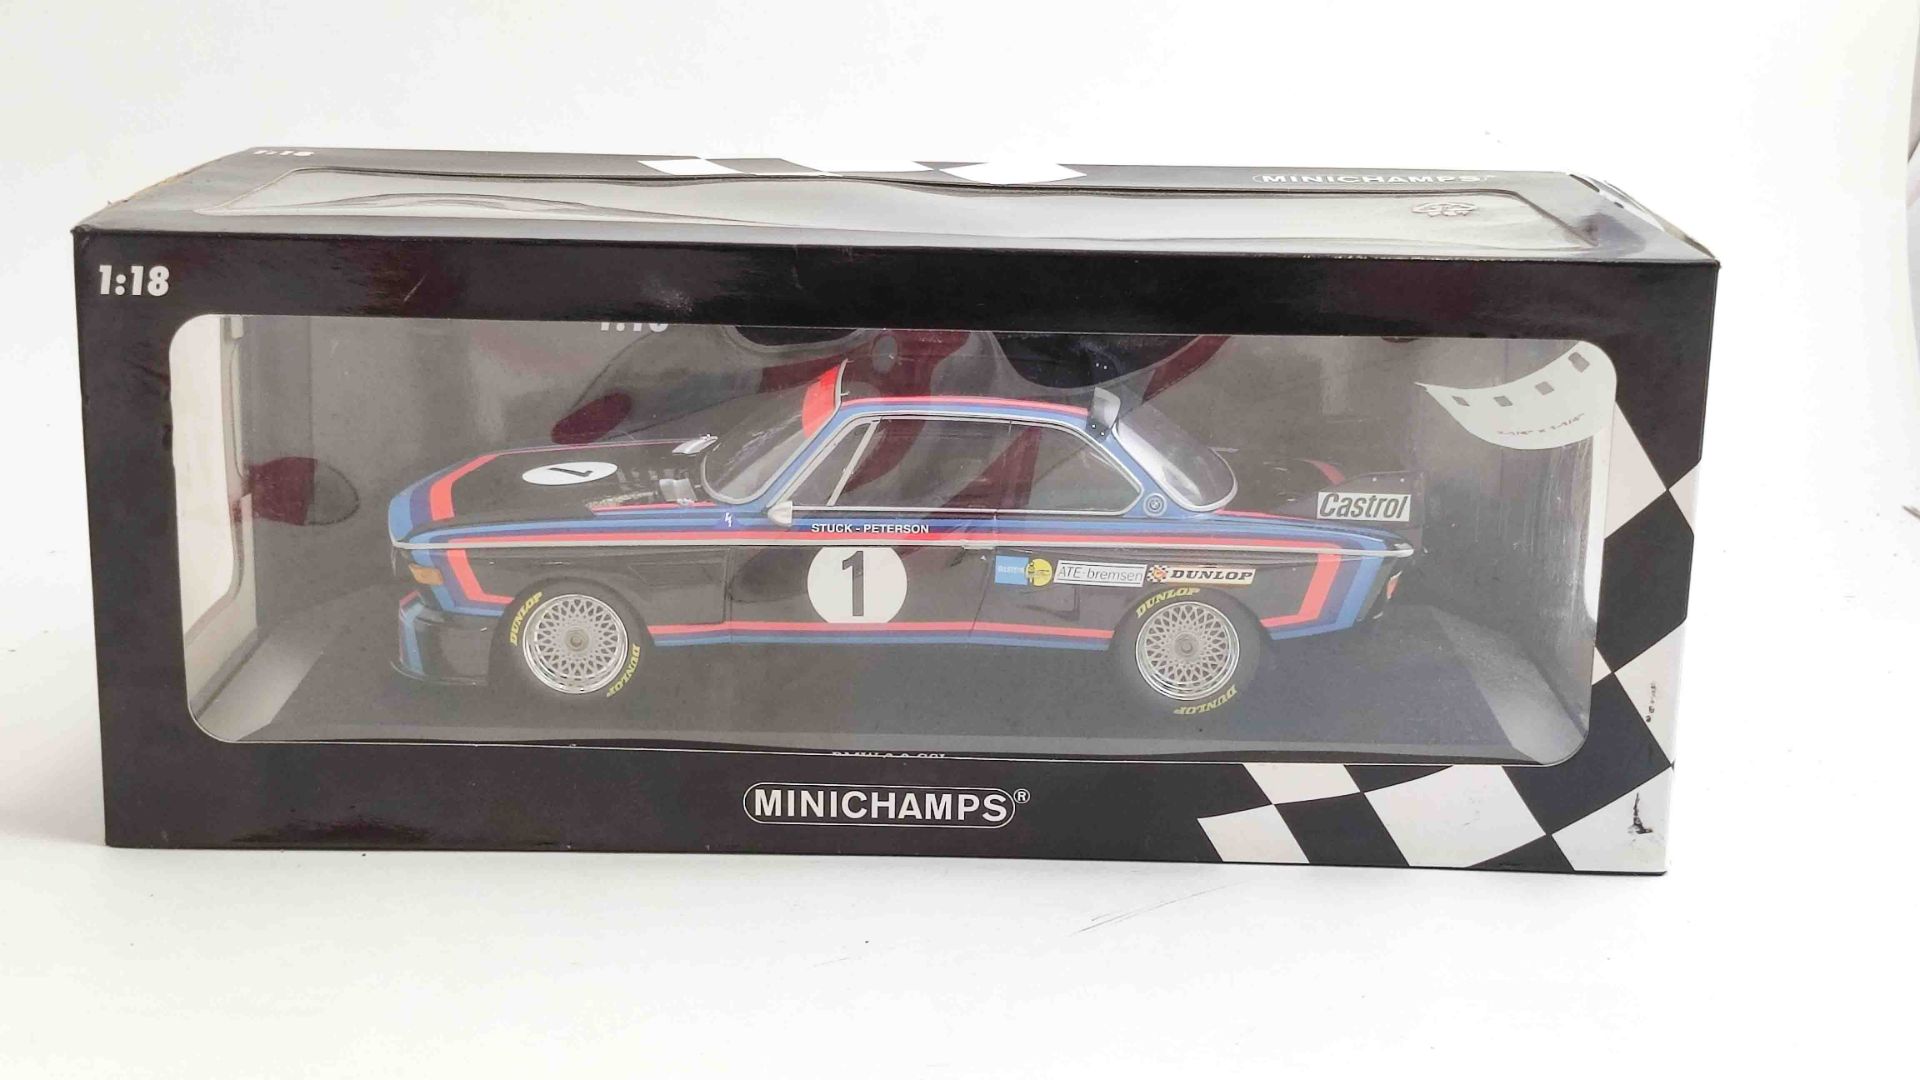 Seltenes BMW Modell 1:18 - Image 3 of 5